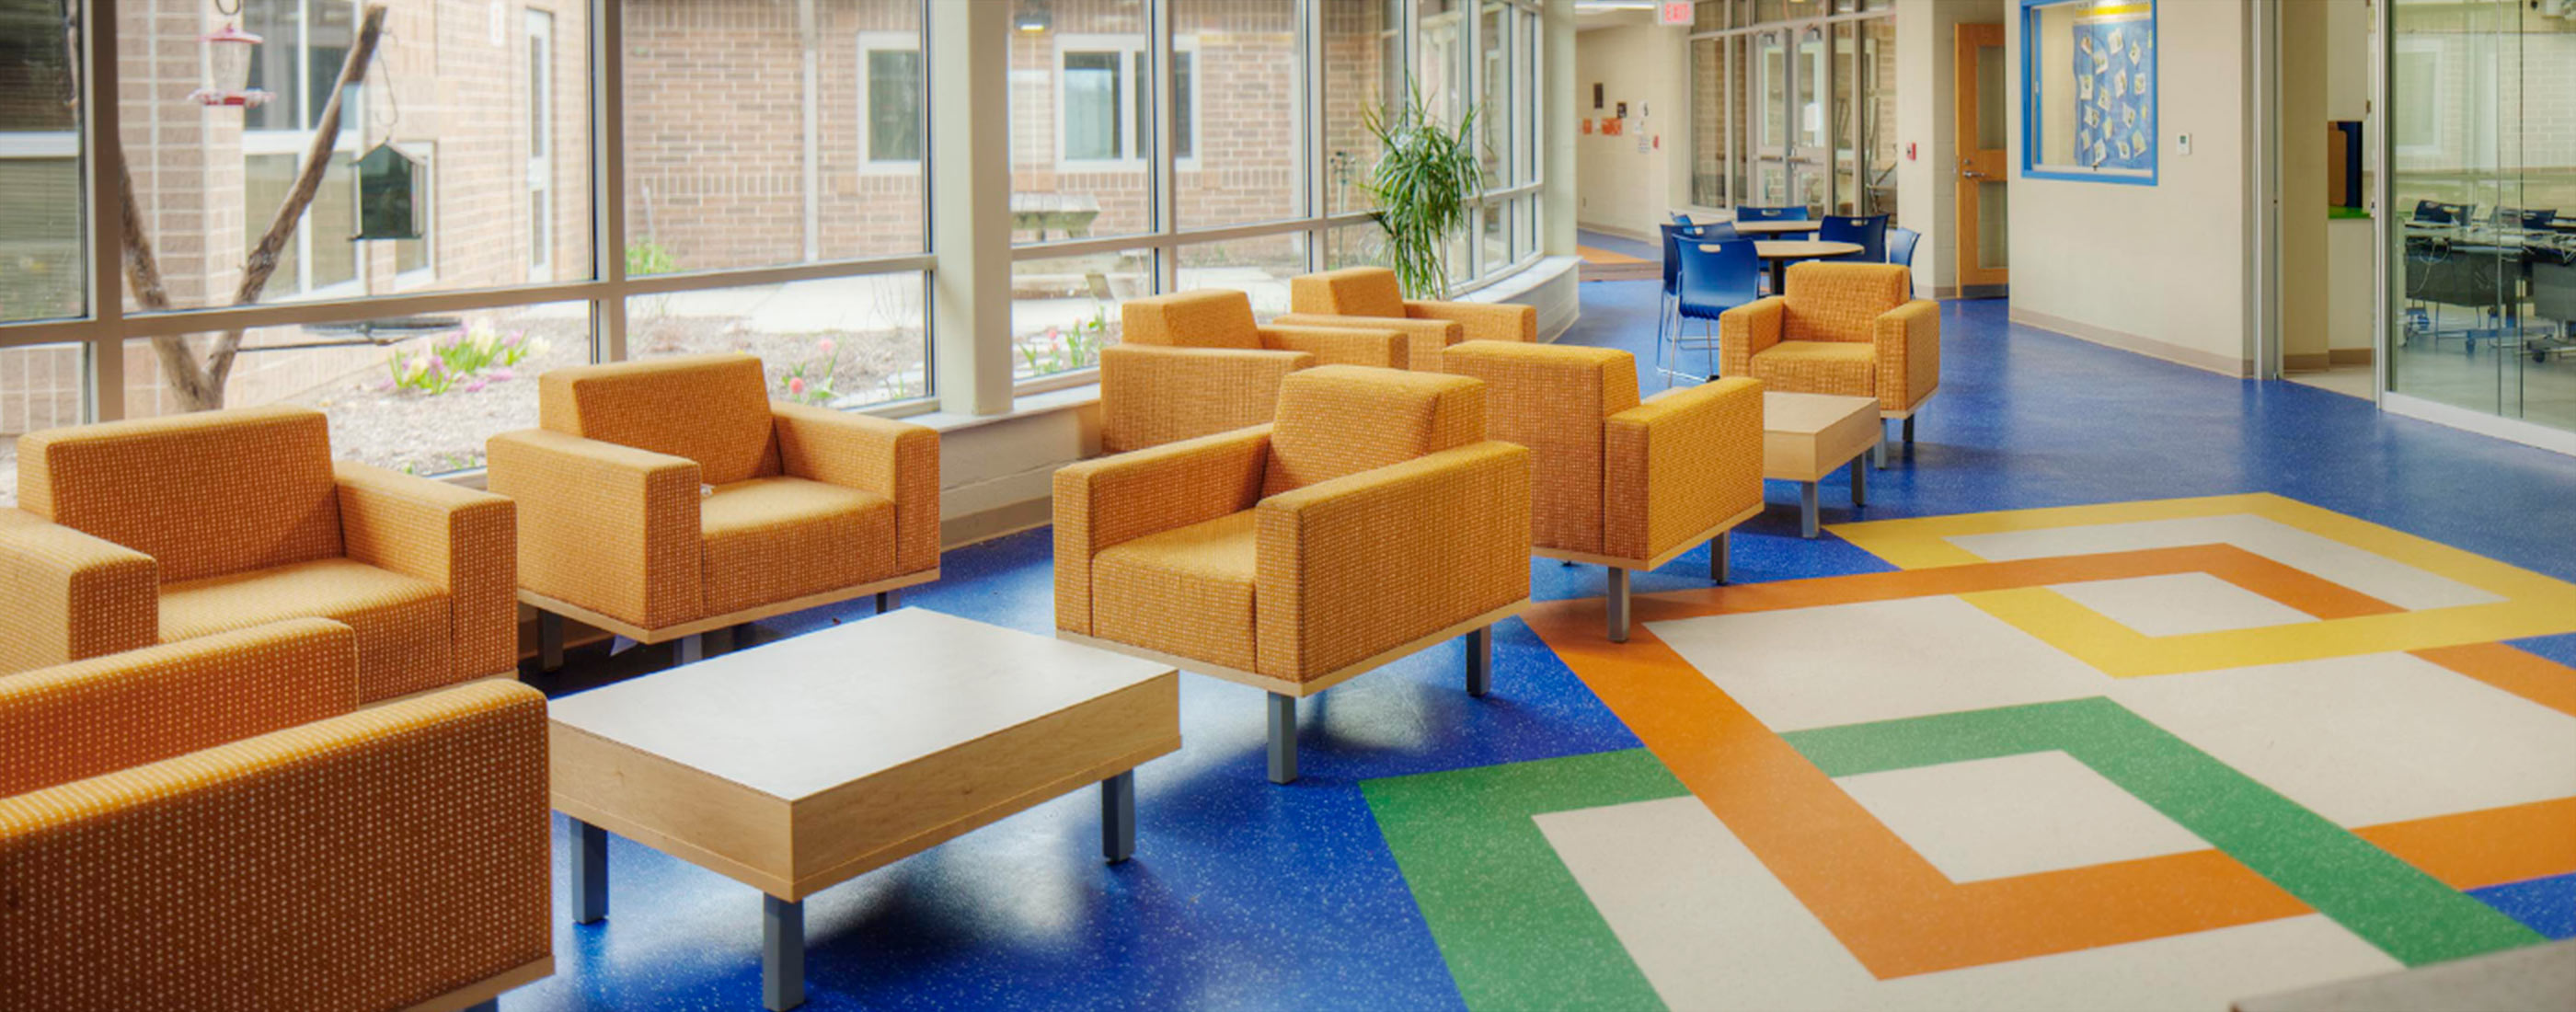 Shared learning spaces and bright colors create a flexible learning environment in West Liberty-Salem Local School District’s campus, designed by OHM Advisors.